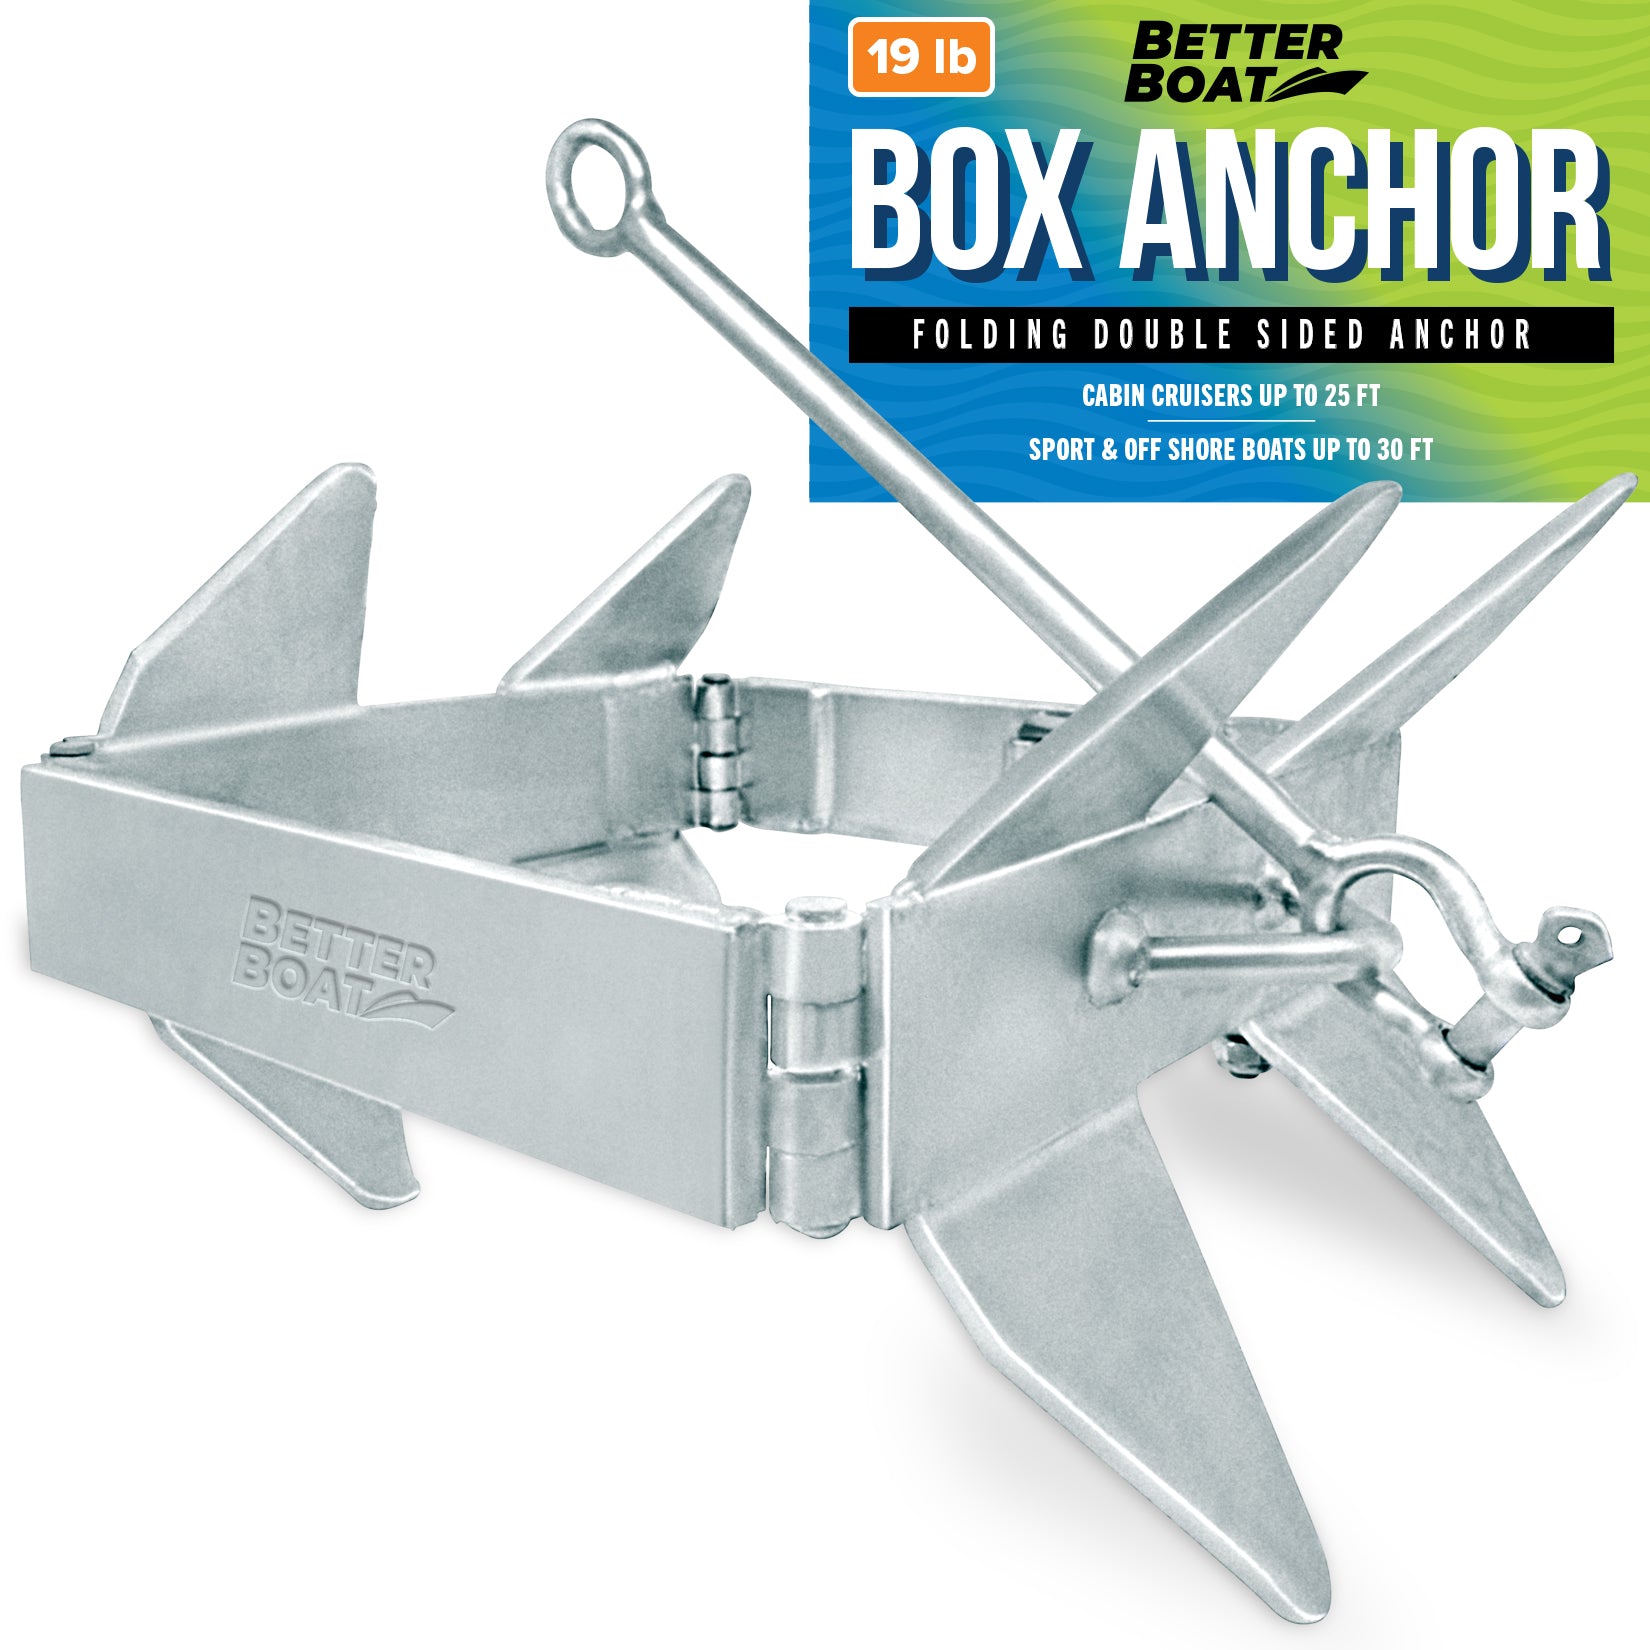 Box Anchor for Boats Folding Anchor – Better Boat